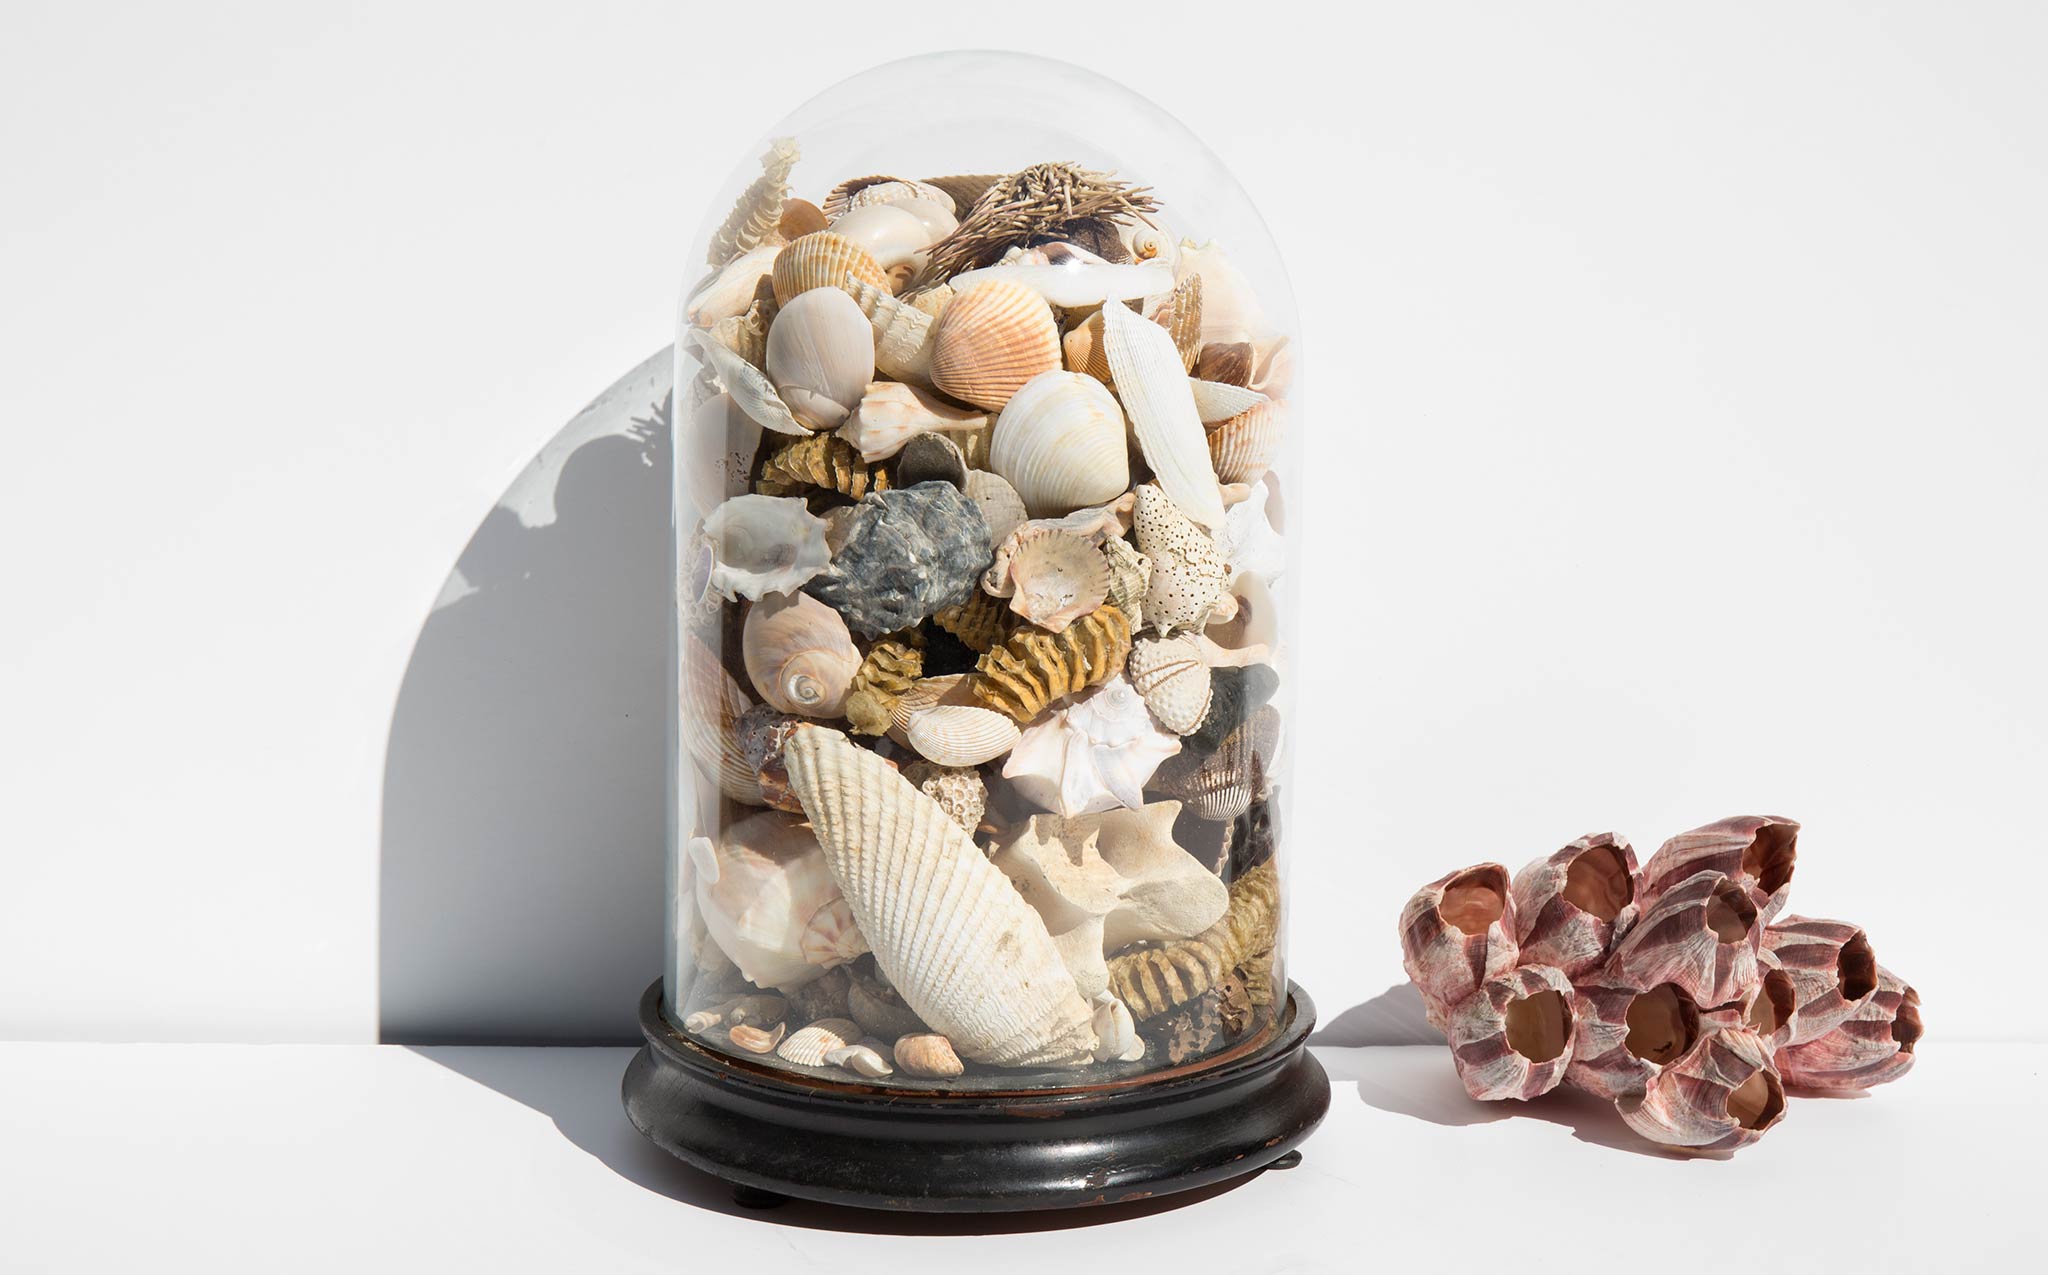 Specimen Dome With Shell Collection